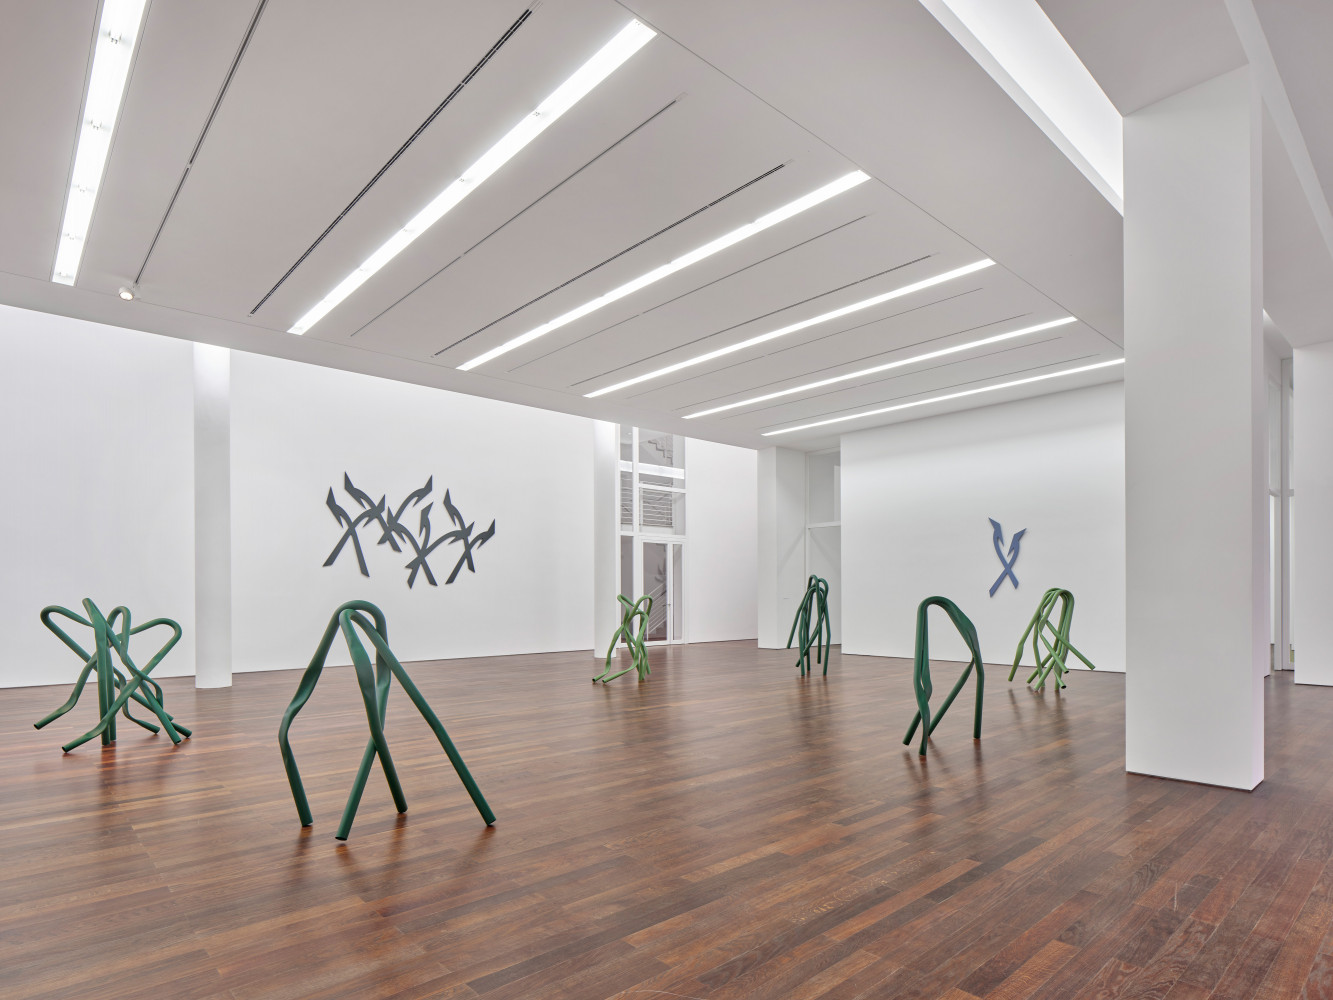 Bettina Pousttchi, ‘Fluidity, Arp Museum’, Installation view, 2022